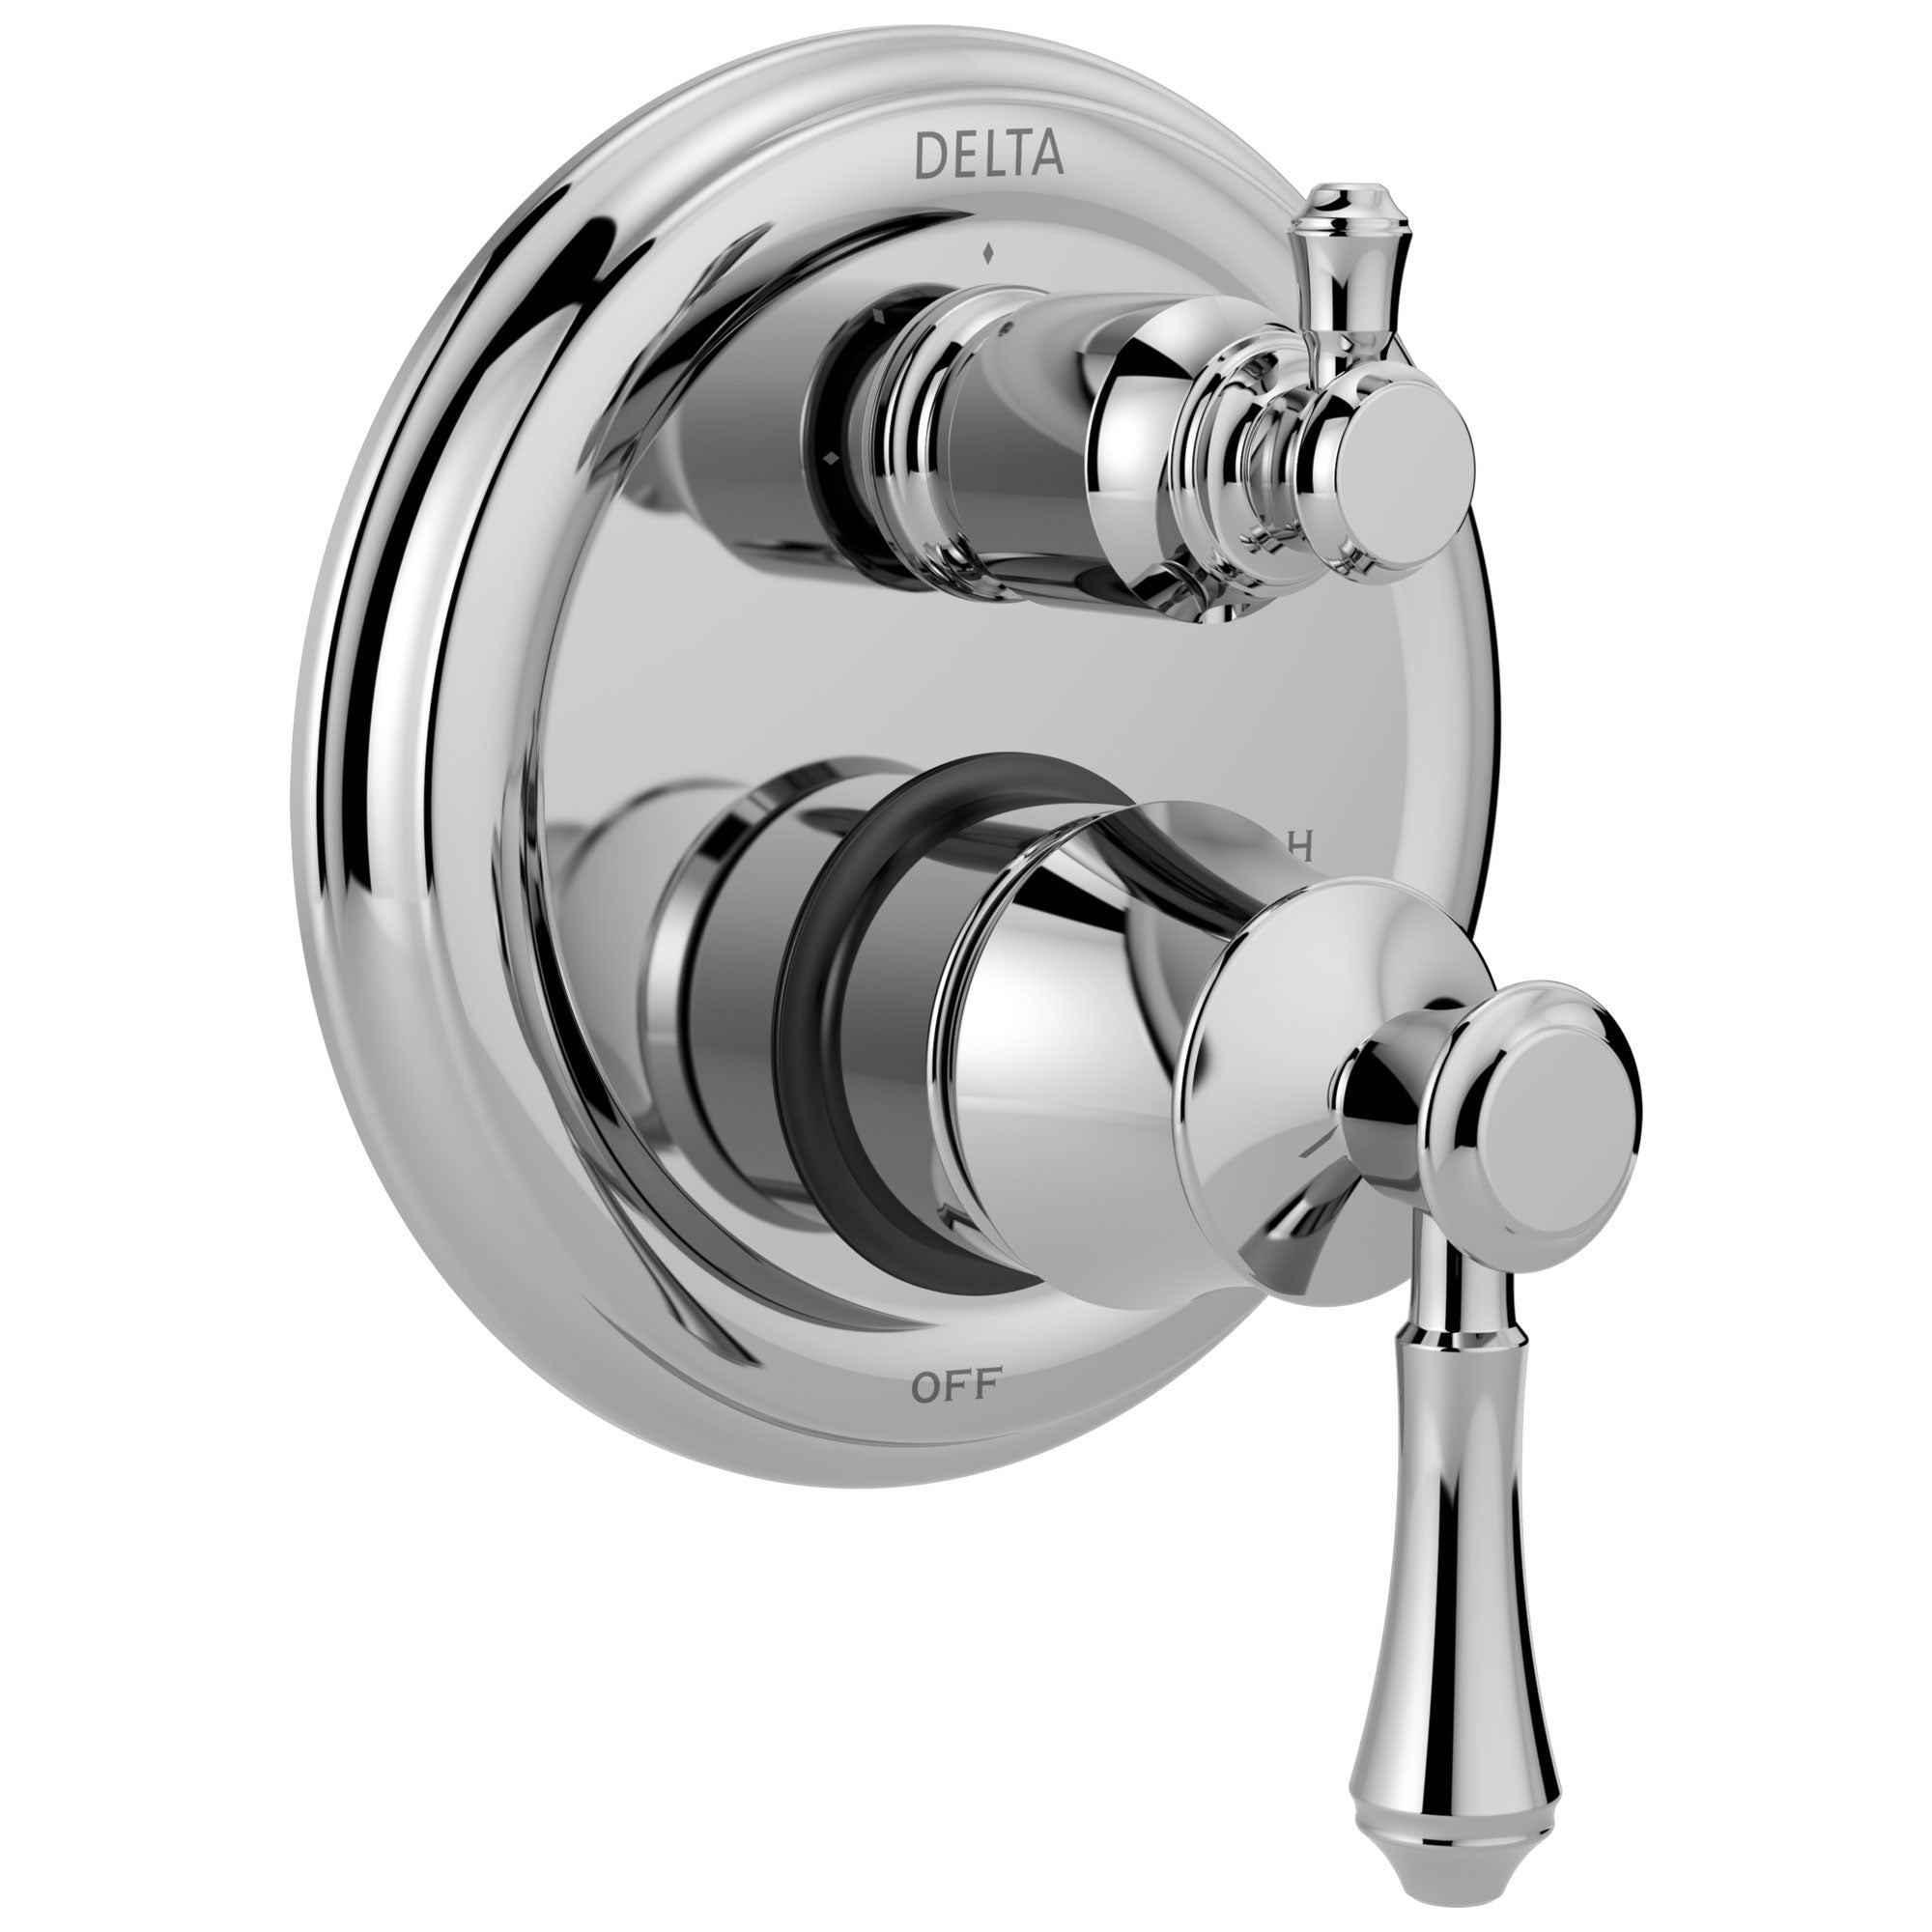 Delta Cassidy Collection Chrome Monitor 14 Shower Faucet Valve Trim Control Handle with 3-Setting Integrated Diverter (Requires Valve) DT24897